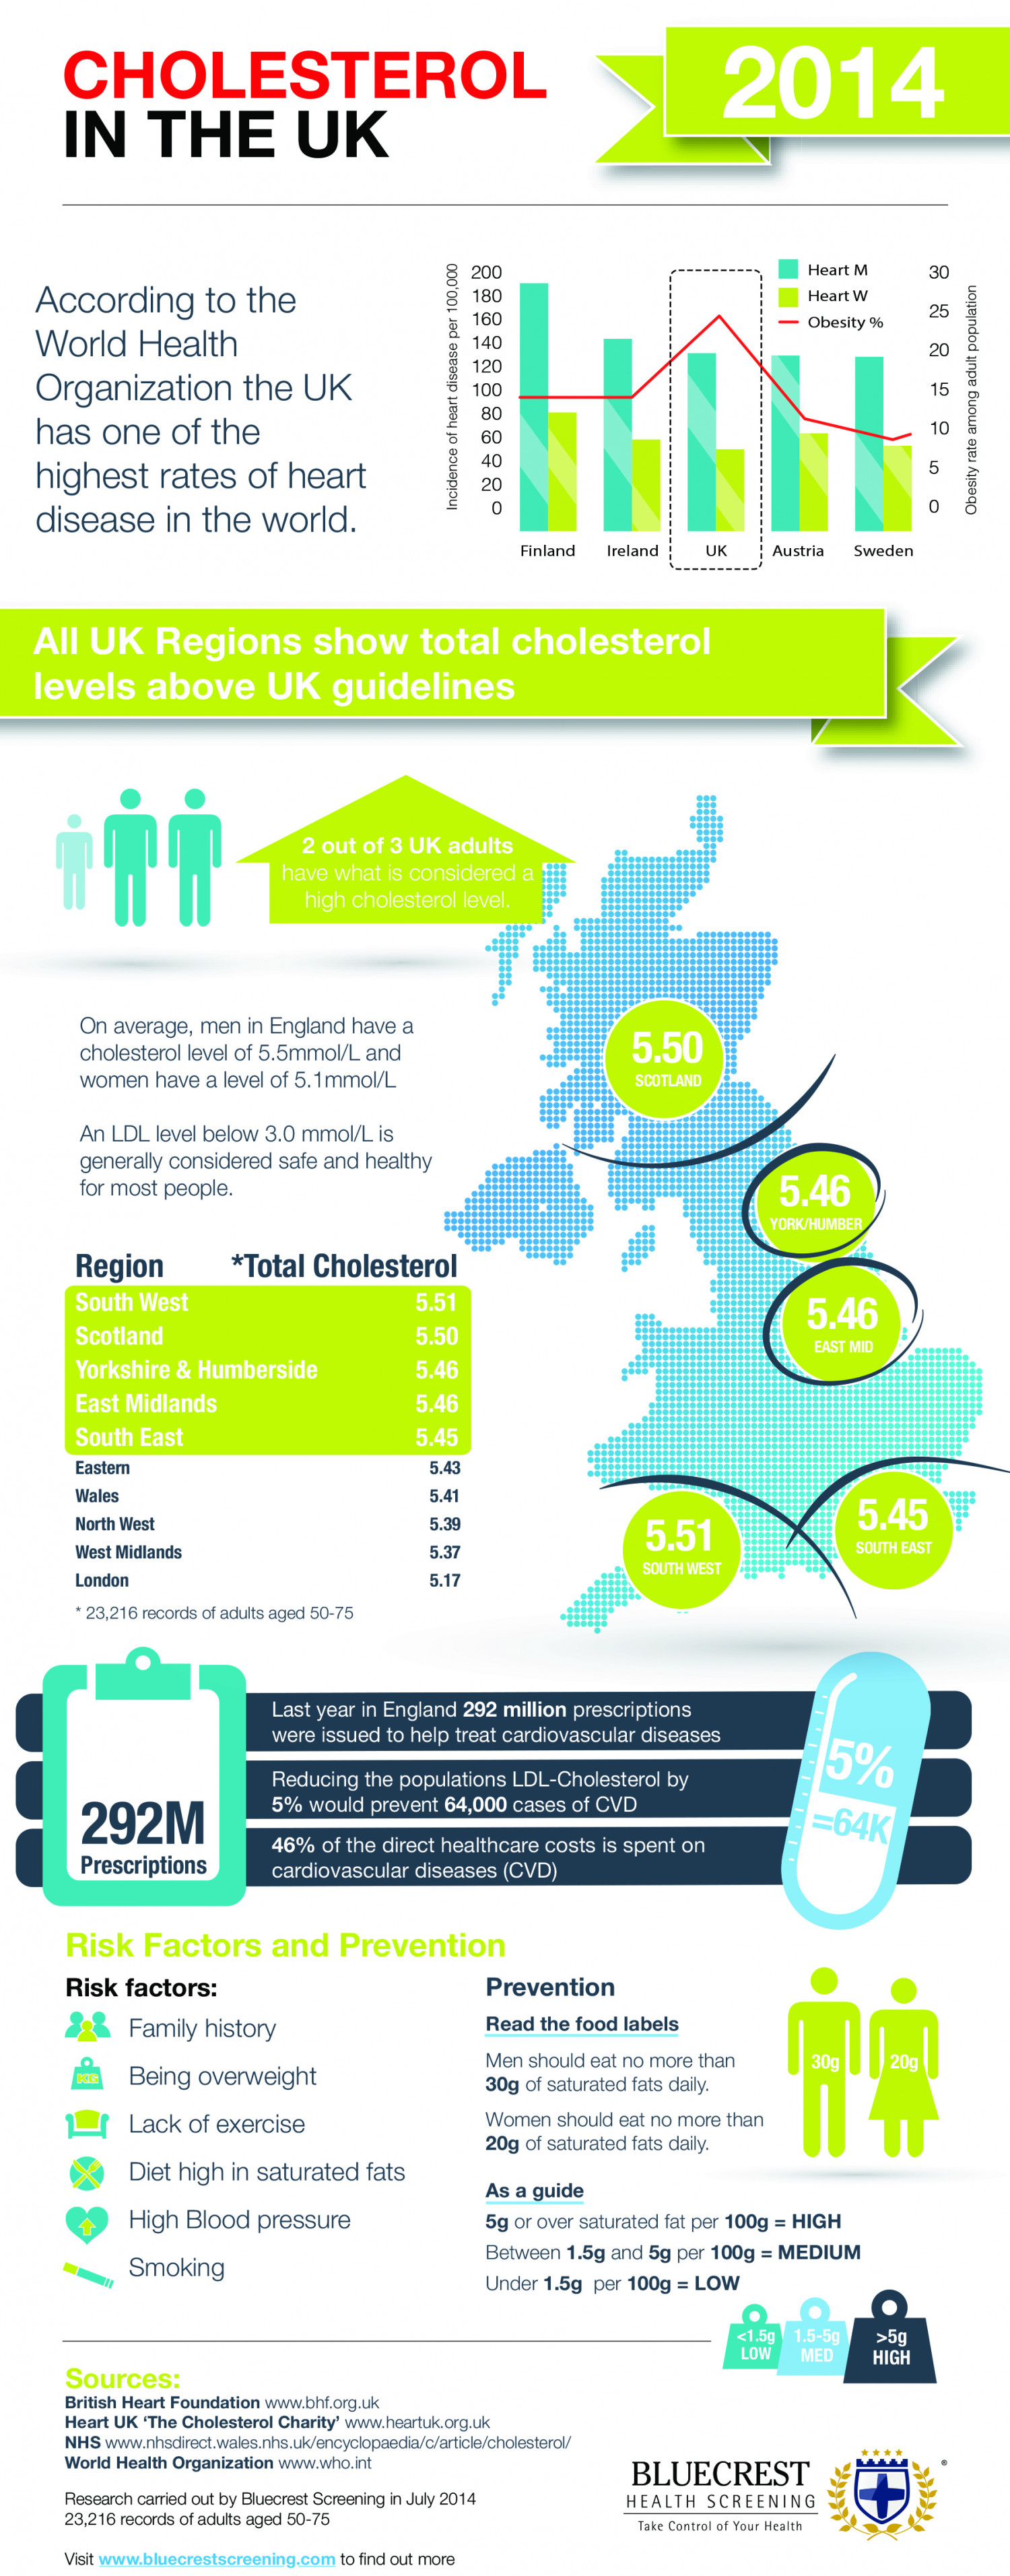 Cholesterol in the UK 2014 Infographic